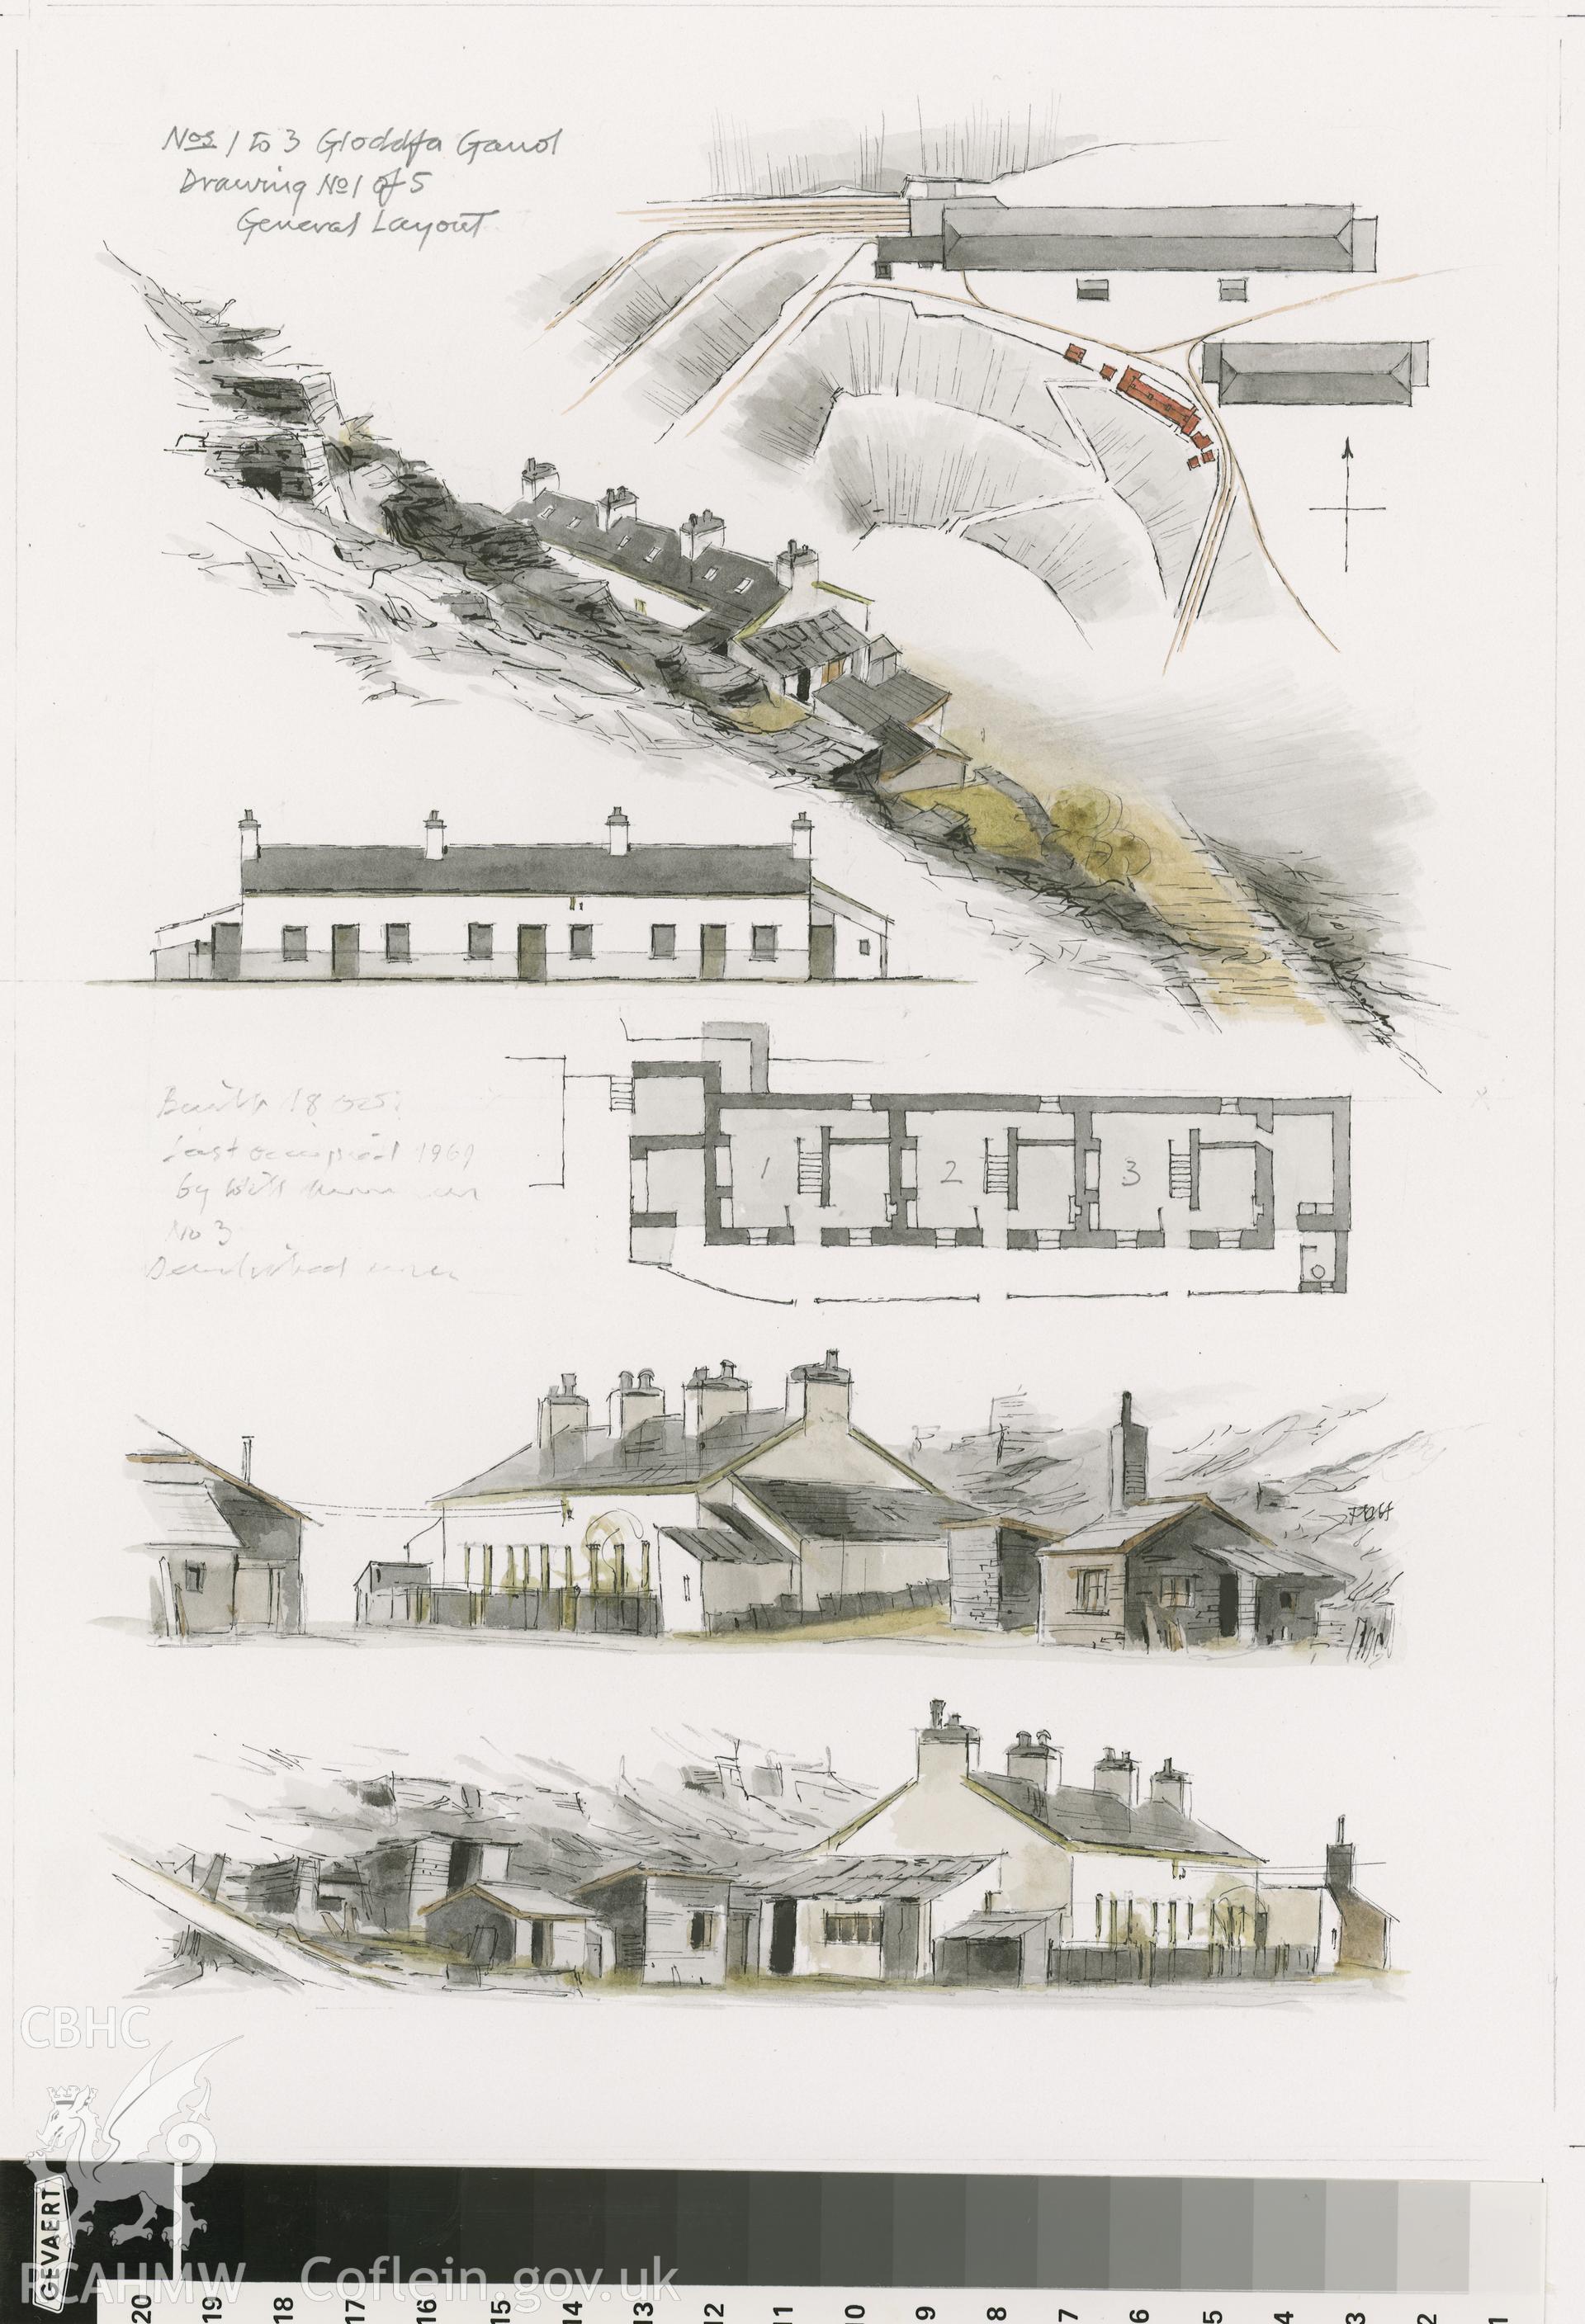 Gloddfa Ganol Cottages - Plan and General Views: (pencil, ink and watercolour) drawing.